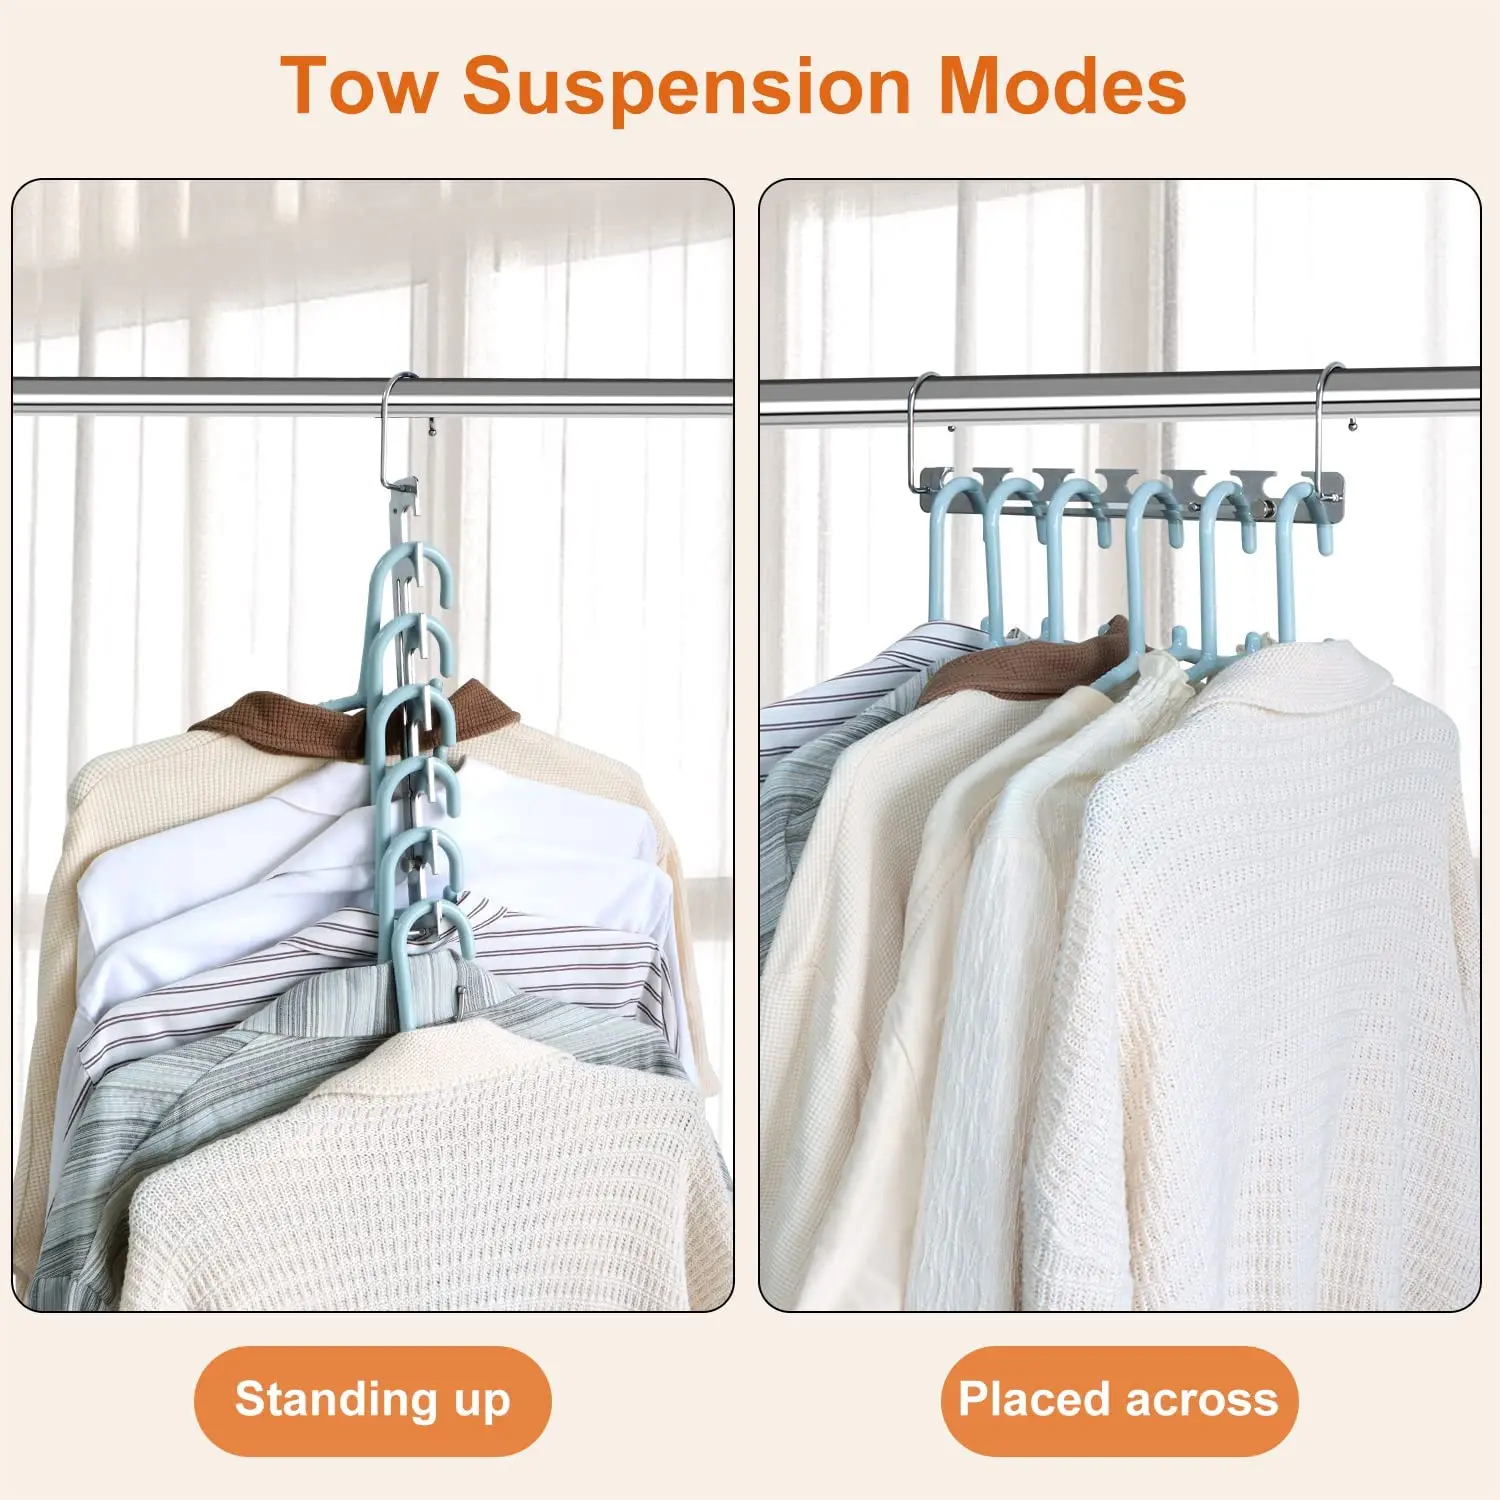 9 Holes Magic Clothes Hangers Metal Space Saving Hangers Sturdy Retractable  Hangers Wardrobe Storage Organize for Heavy Clothes - AliExpress